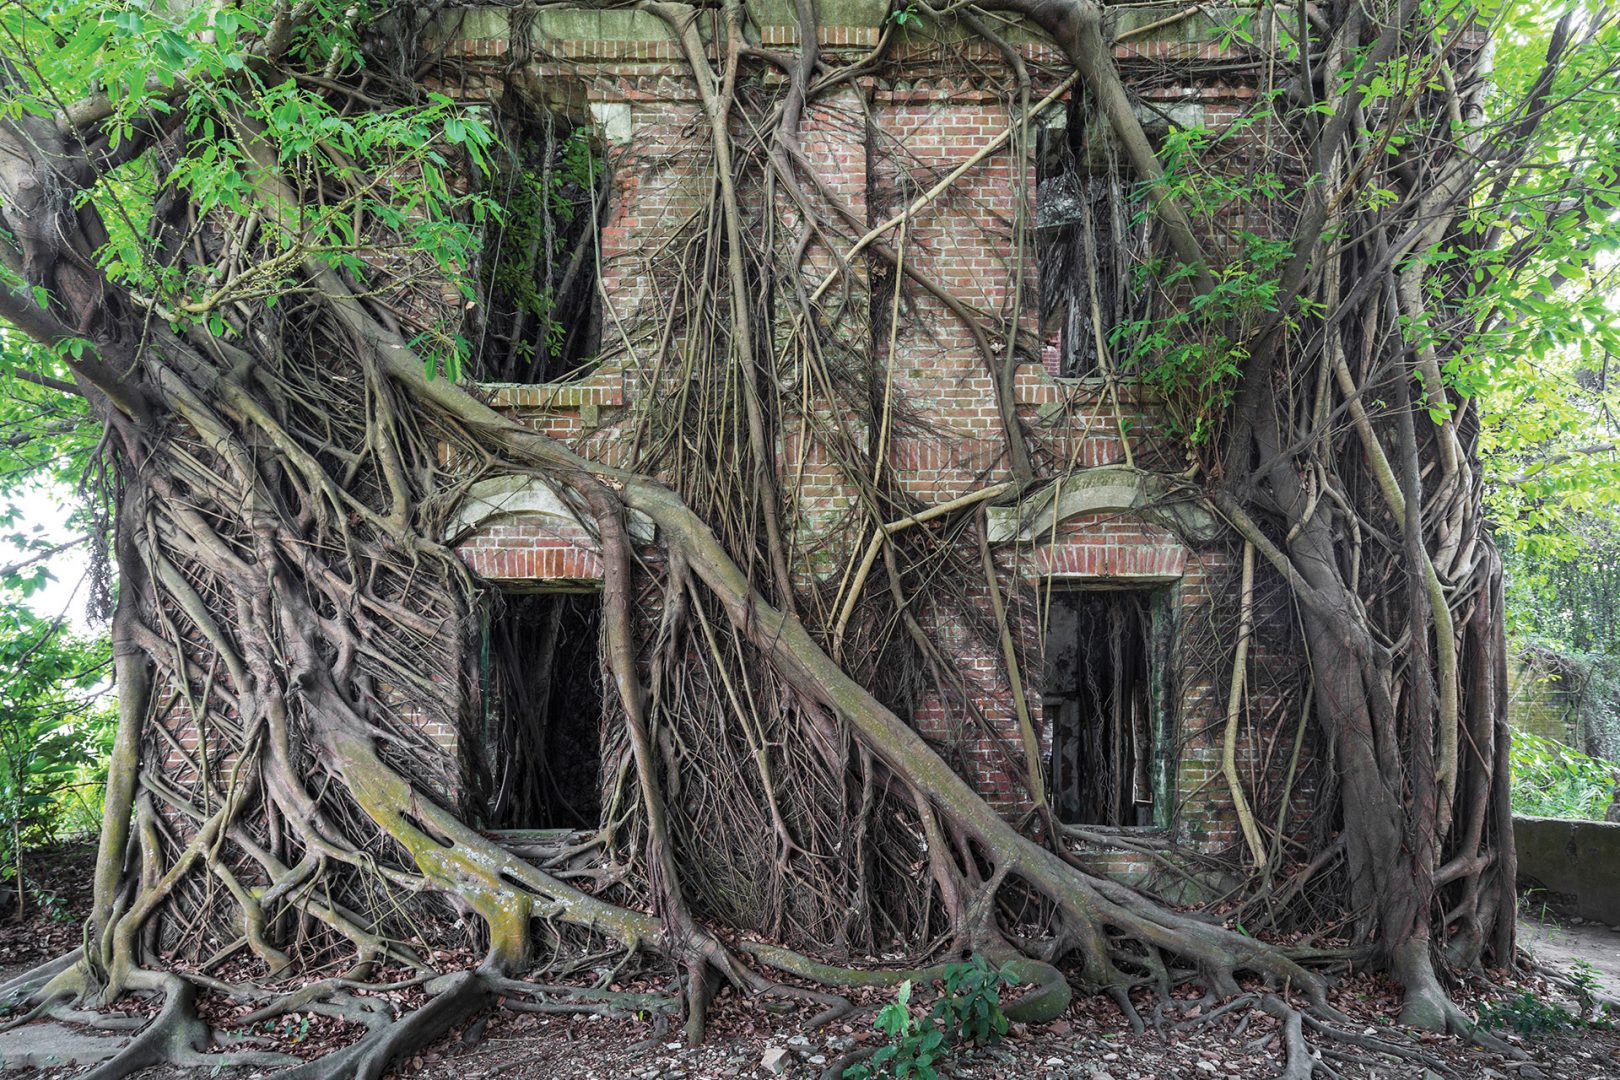 This Photographer Captures Amazing Pictures of Nature Reclaiming Civilization